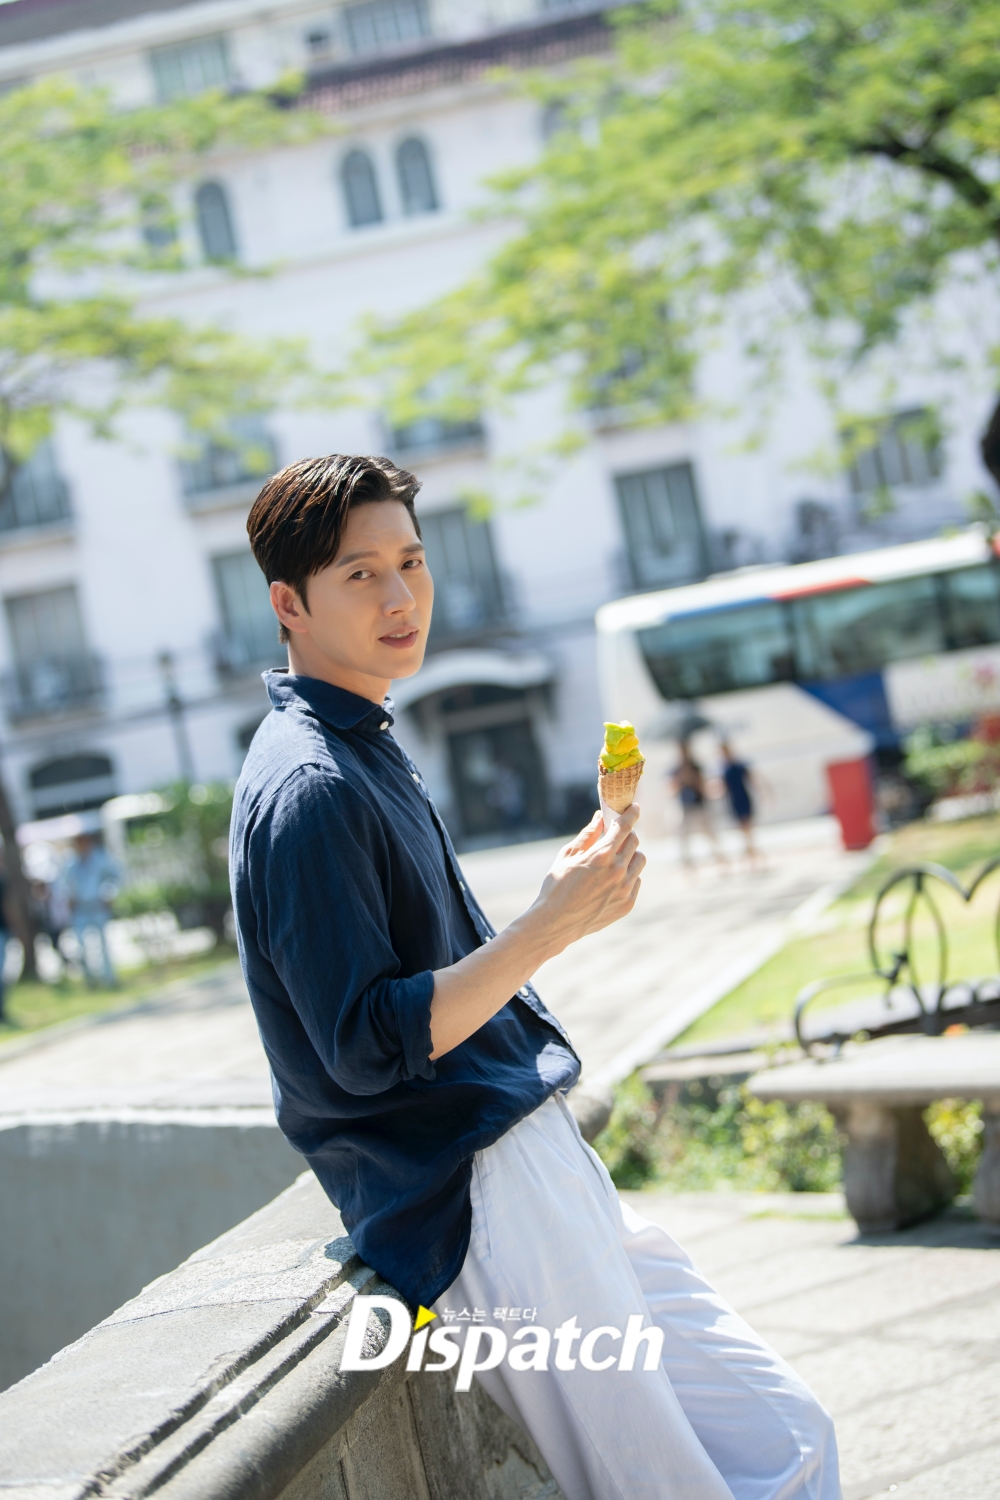 Actor Park Hae-jin has revealed his daily life like a pictorial.Park Hae-jin last year filmed KBS-2TV Forest at Philippines Manila; the photo is behind-the-scenes.Park Hae-jin had a brief sweet break during filming: strolling the streets alone, her eyes focused on superior visuals.The shooting took place in an environment of more than 30 degrees. Park Hae-jin was shooting with a bright Smile all the time despite the heat wave.Park Hae-jin played Kang San-hyuk in Forest, and he captured the audience by traveling between cold-blooded businessmen and warm 119 rescuers.He showed his face with a contradictory charm. He was a corporate hunter and he was cool.119, turned into a rescue team, met Jo Bo-a (played by Jeong Young-jae) and expressed the process of growing up as a warm human being.Forest is a pre-production drama, which was filmed last August. The final episode airs today at 10 p.m.In the 30th episode (the 18th), Kang was shot instead of Jung Young-jae, who fell unconscious and ended up crying in shock.Attention is drawn to the final ending of Gangjeong Couple.Meanwhile, Park Hae-jin is filming MBC-TV new tree mini series Dae Intern.The exciting revenge of Park Hae-jin, who will welcome his boss (Kim Eung-soo) as a subordinate, is scheduled to air in May.superior visuala walking picturePrince on the White HorseStrembling for this man.a pictorial breakWould you like to join me?Im hit by a Smile.